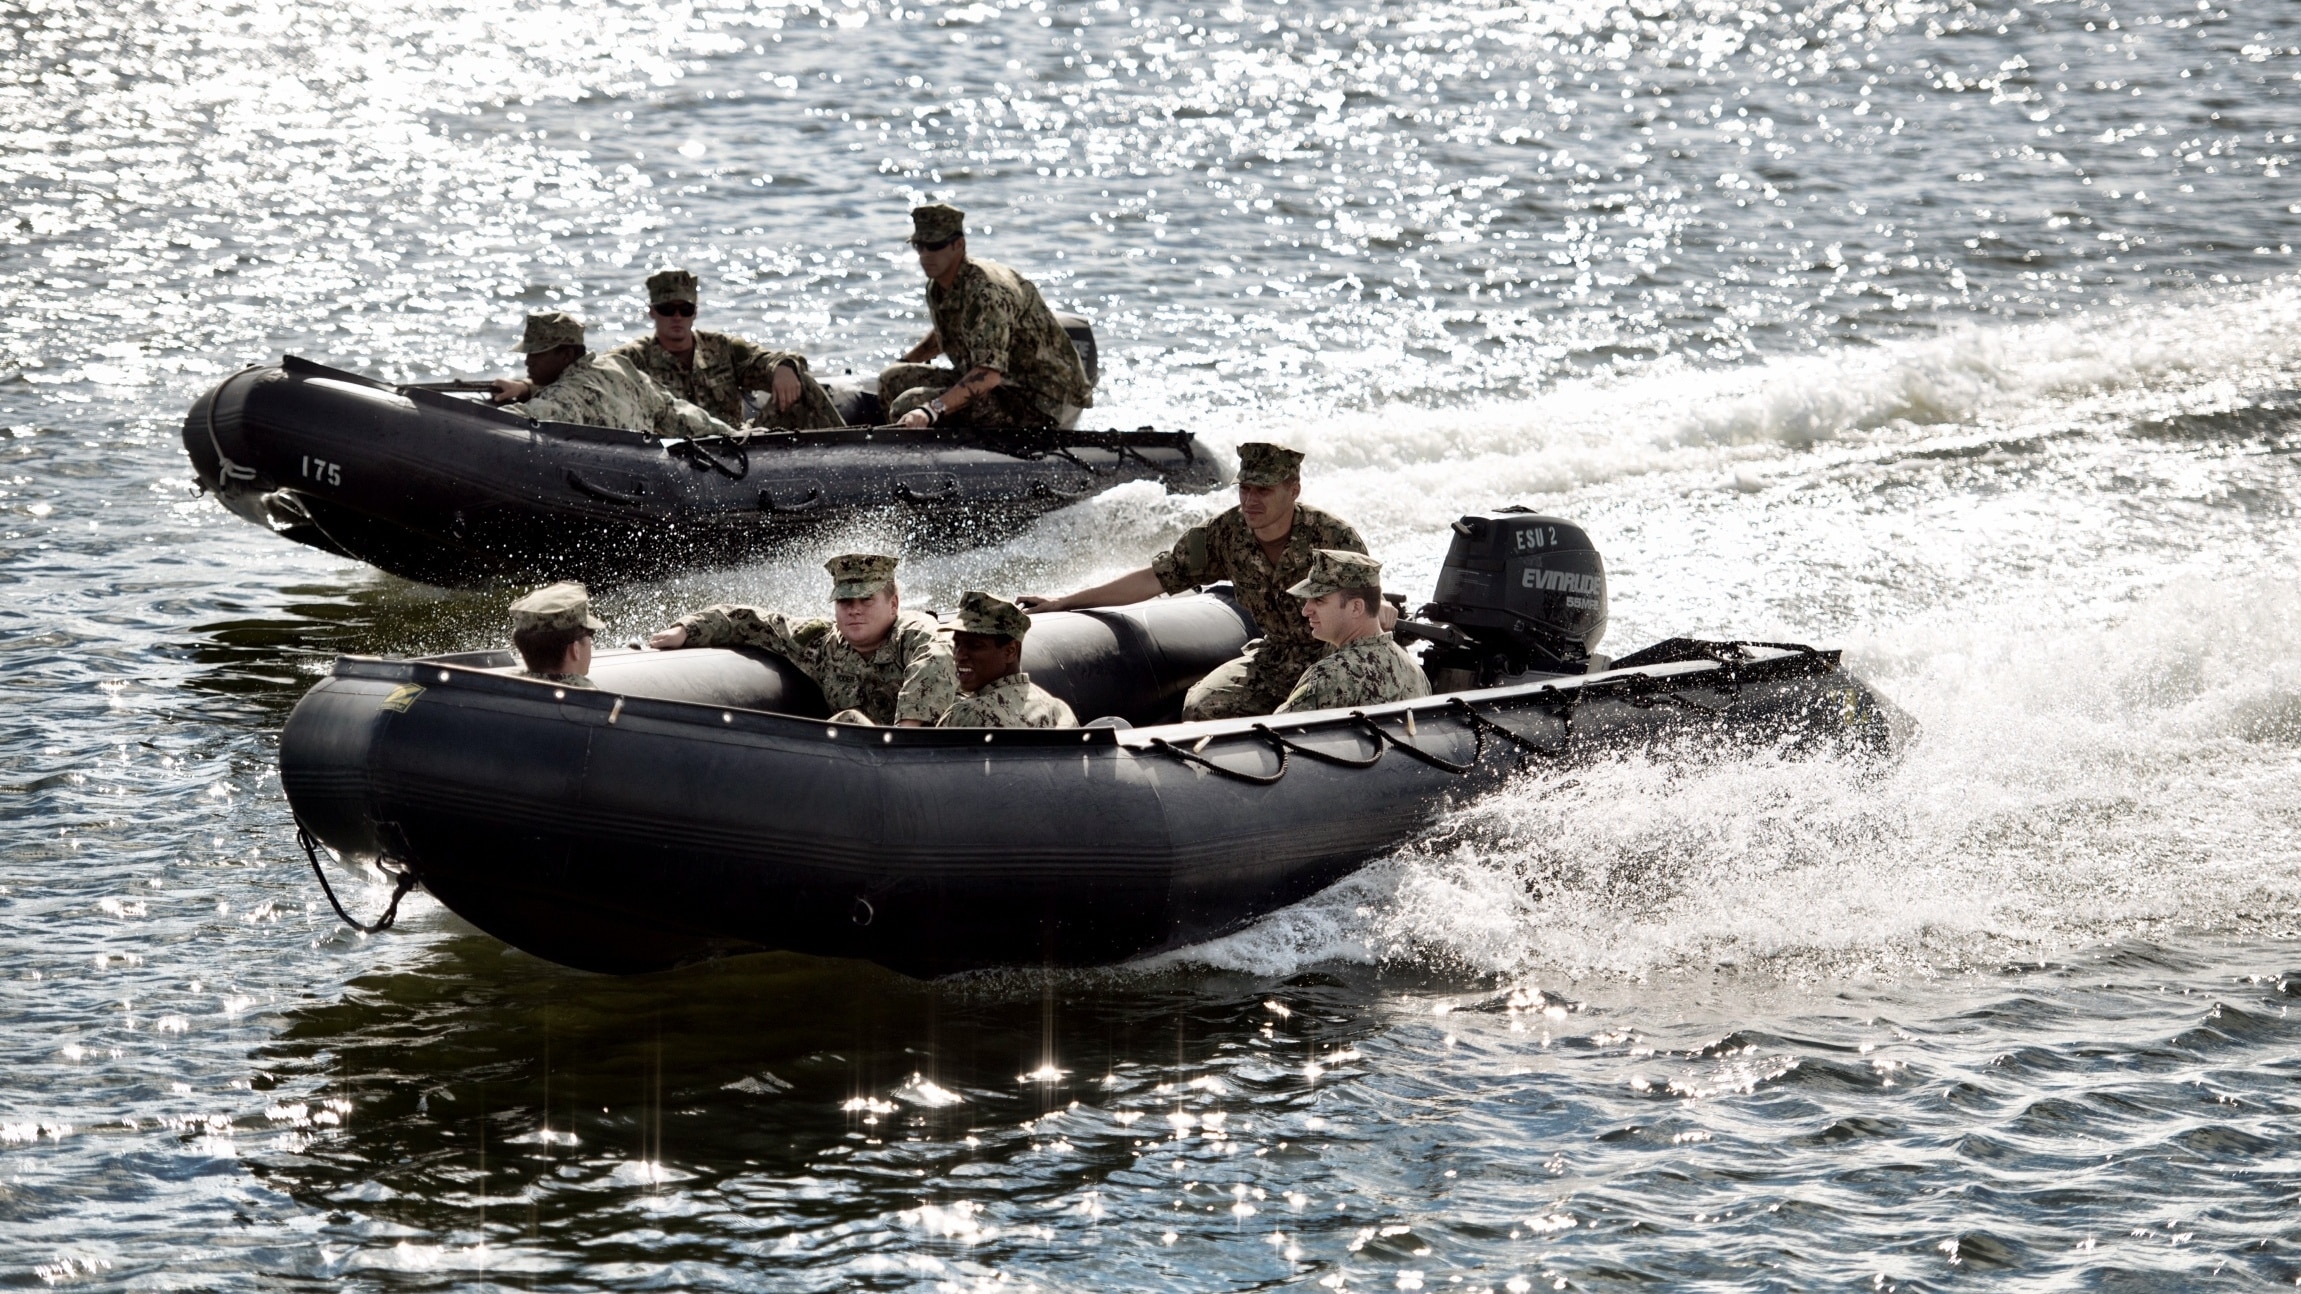 Military personnel driving boats yielding Evinrude motors